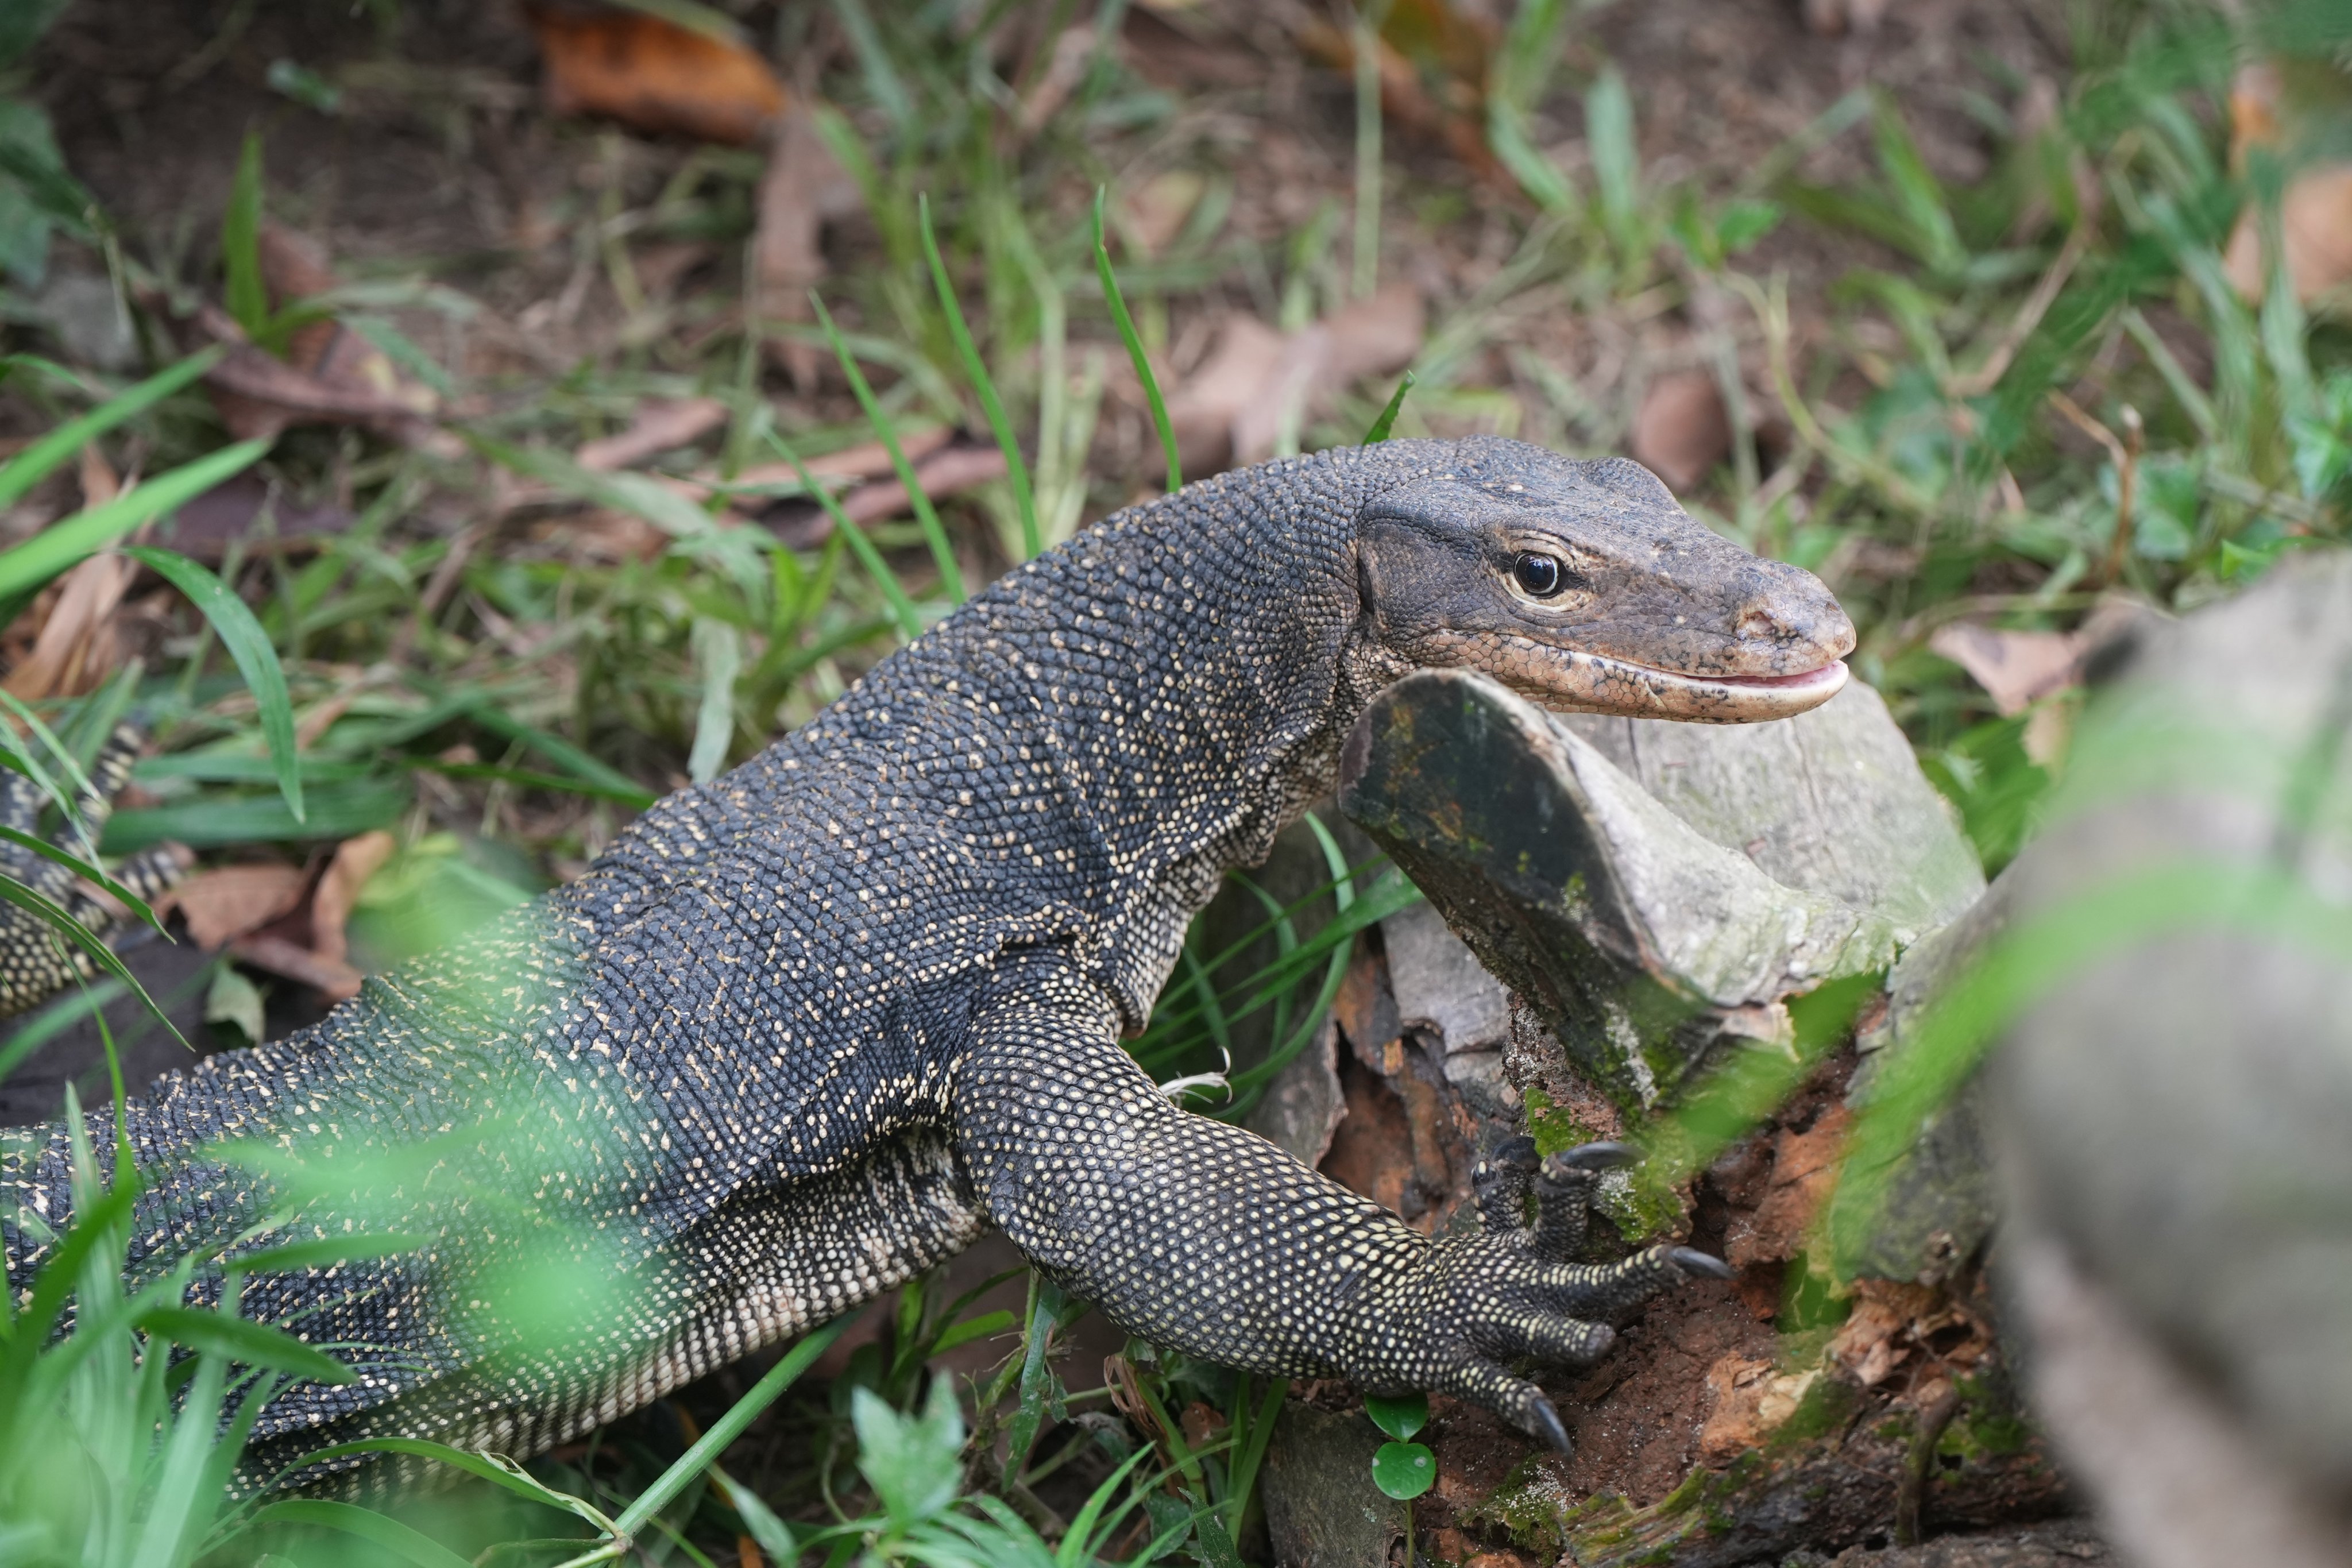 Aberdeen has served as a reptile ambassador at the Kadoorie Farm and Botanic Garden for eight years after he was rescued from the illegal pet trade. Photo: Sam Tsang